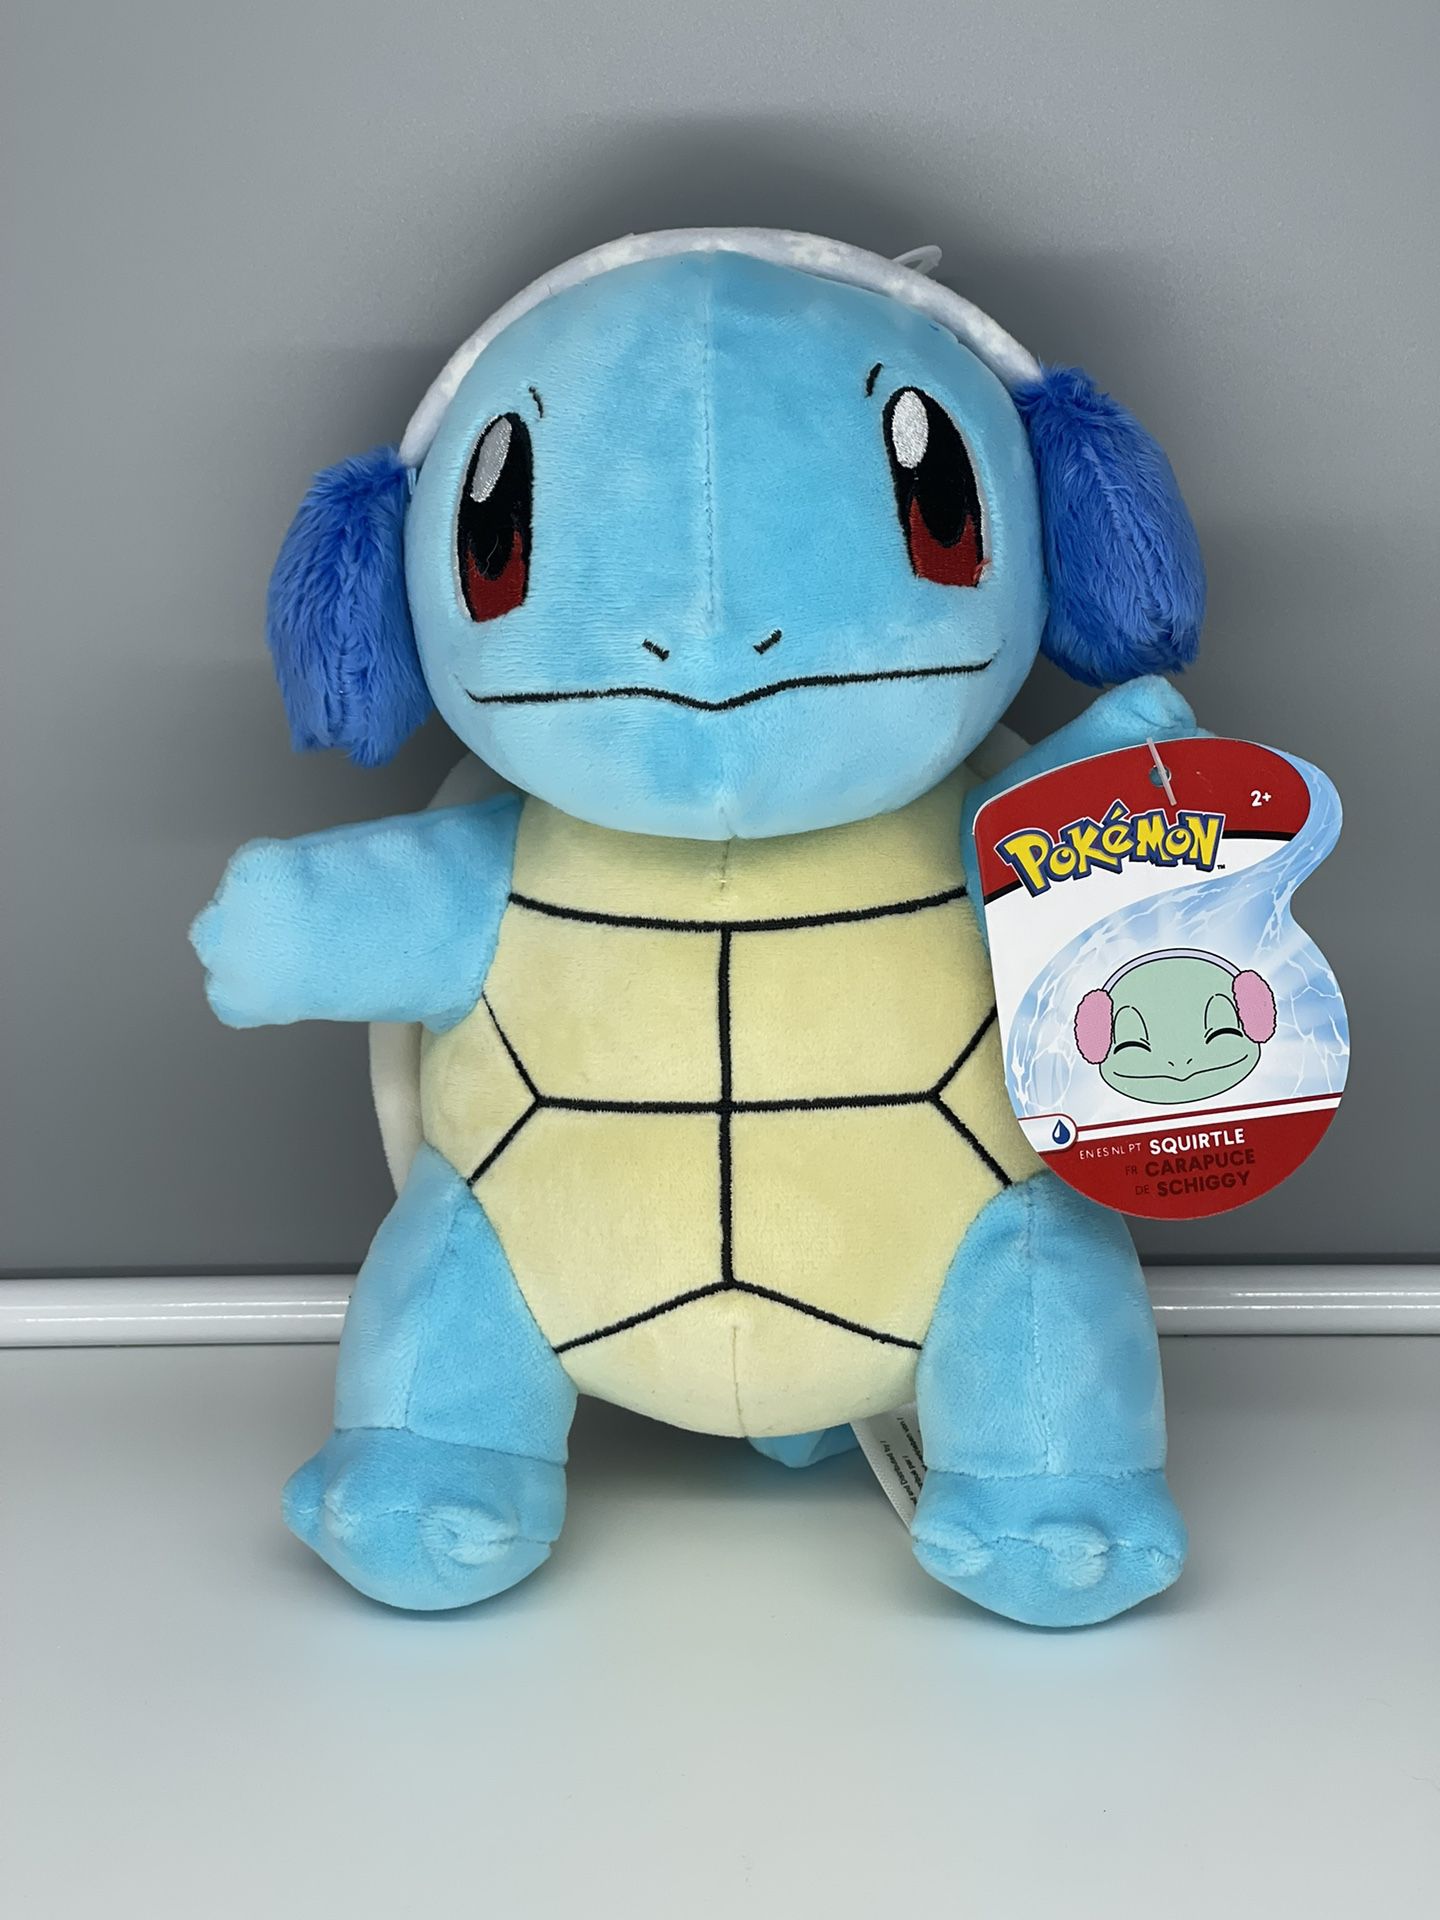 Pokemon holiday Squirtle plush with ear muffs NWT 8 inches